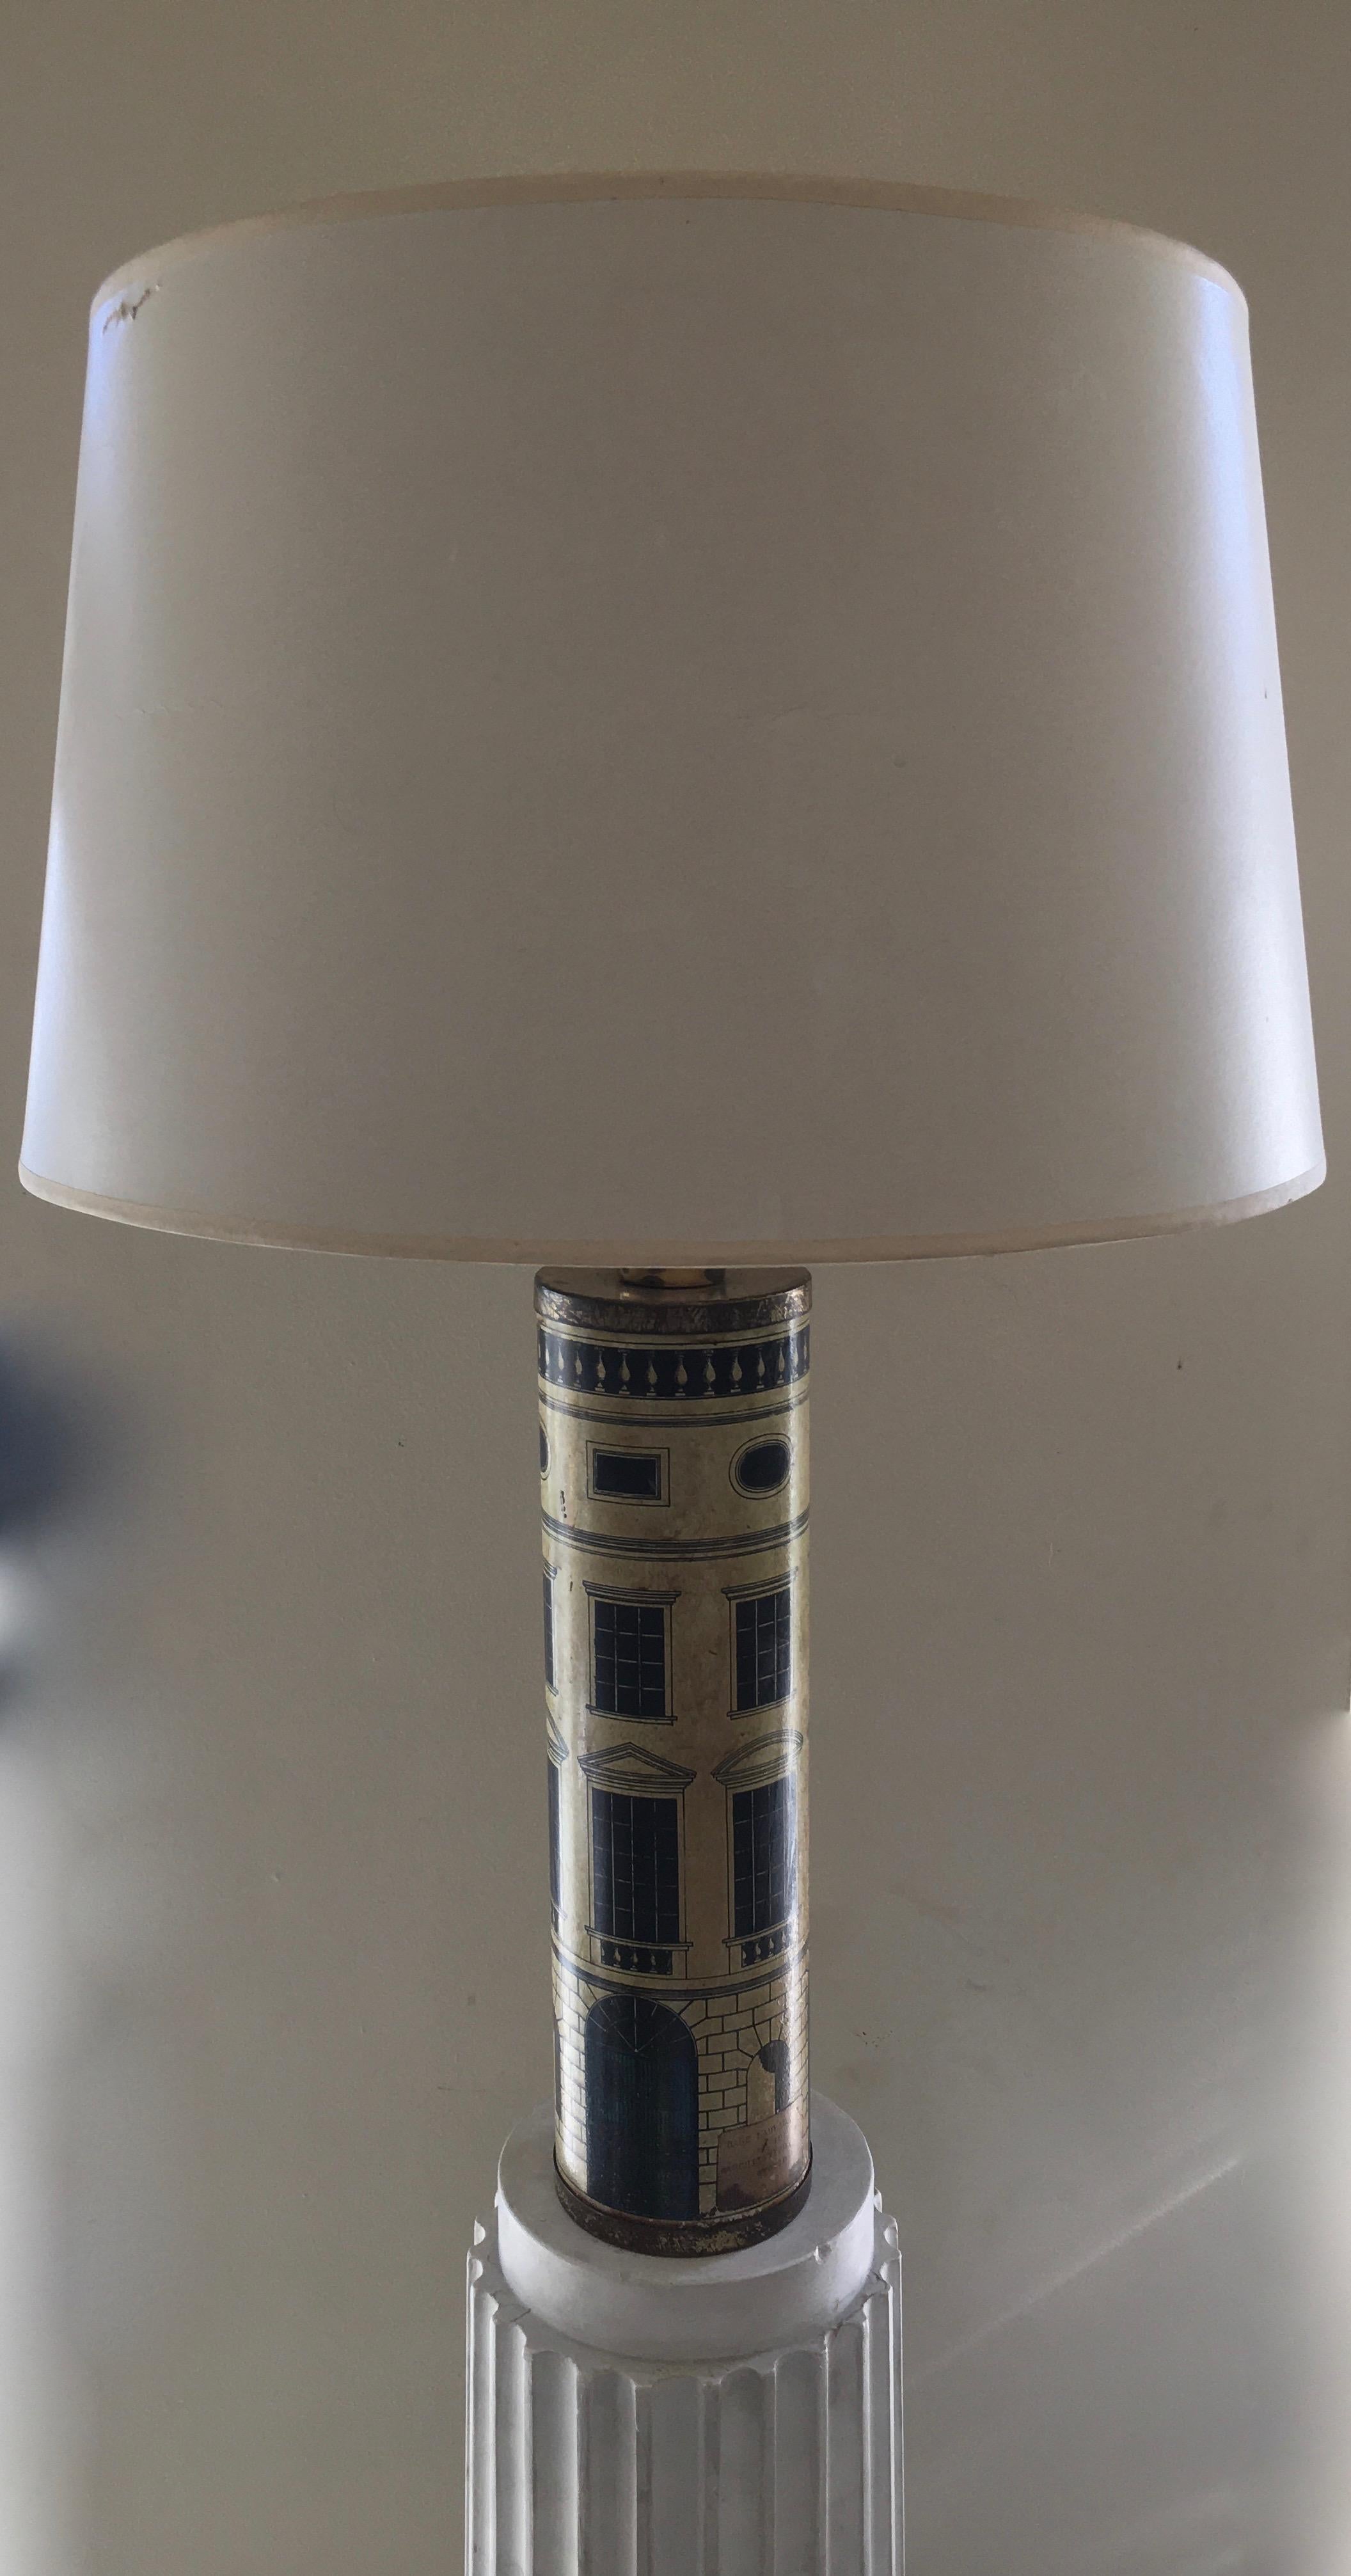 This iconic lamp is coming from P. Fornasetti workshop in Milan.
Labeled 